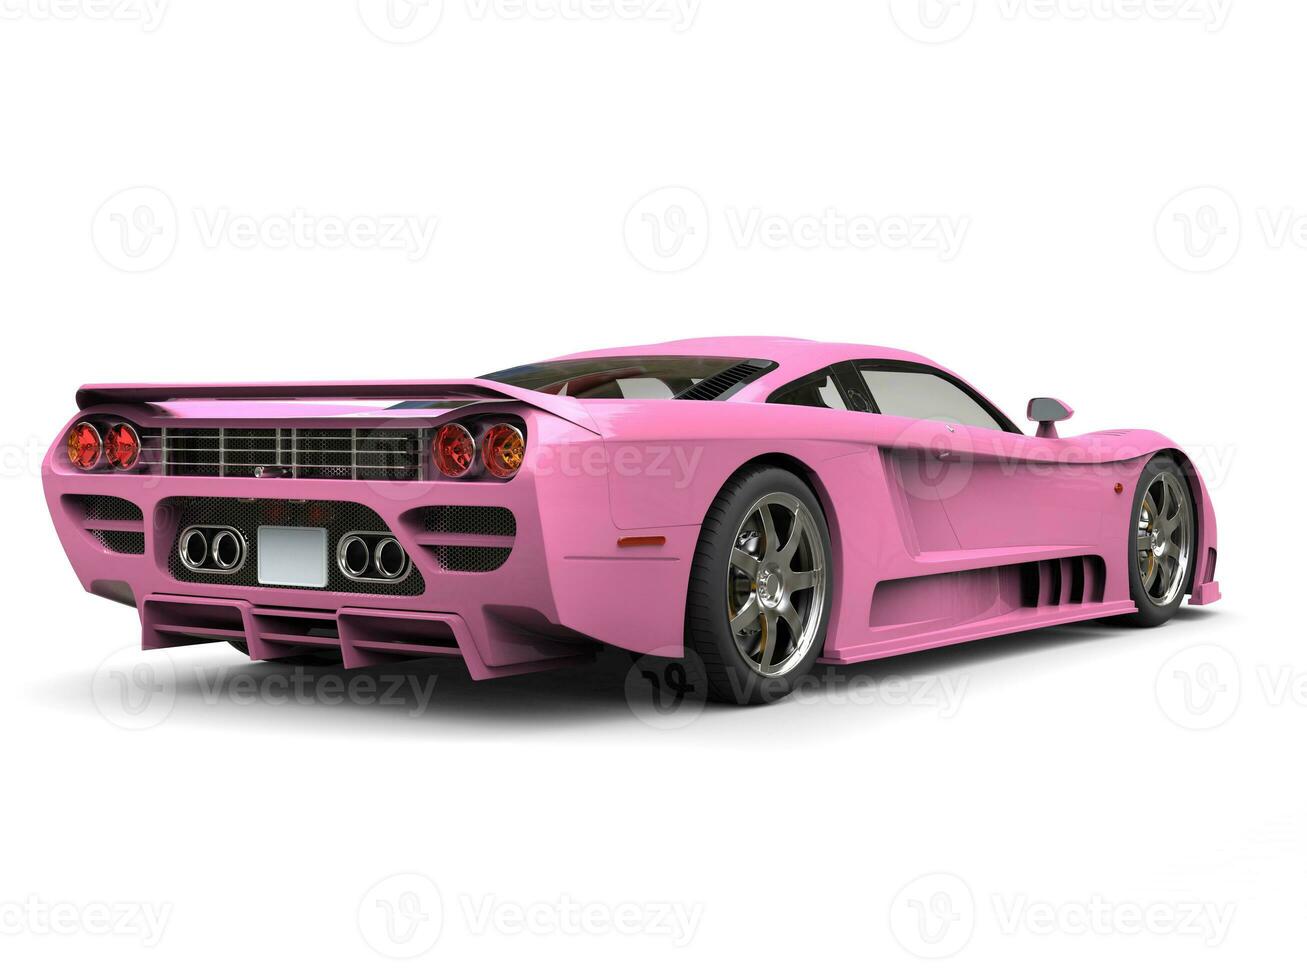 Clear pink super race car - back view photo